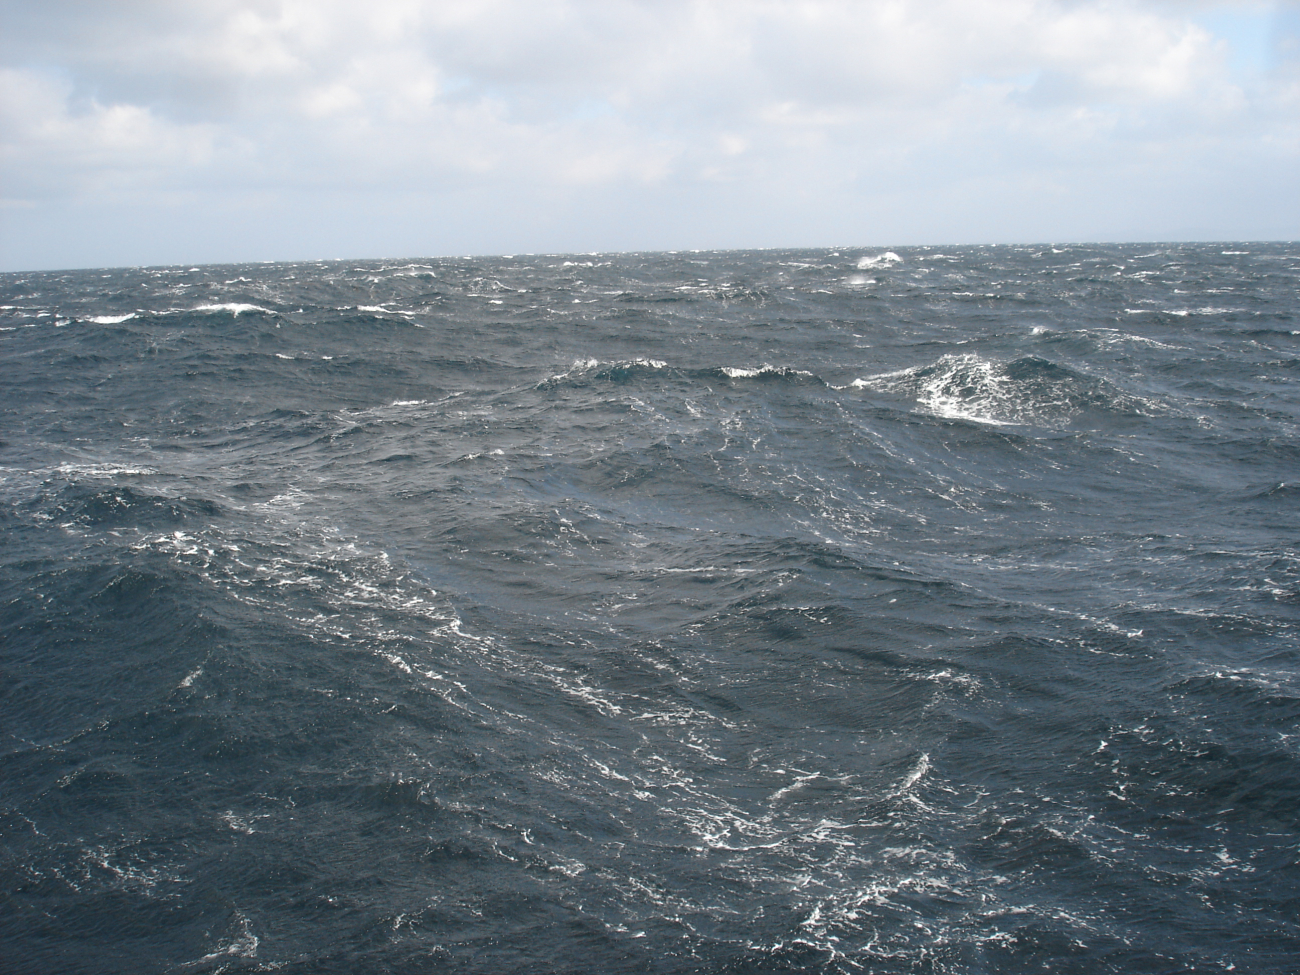 Typical day at sea in the Bering Sea